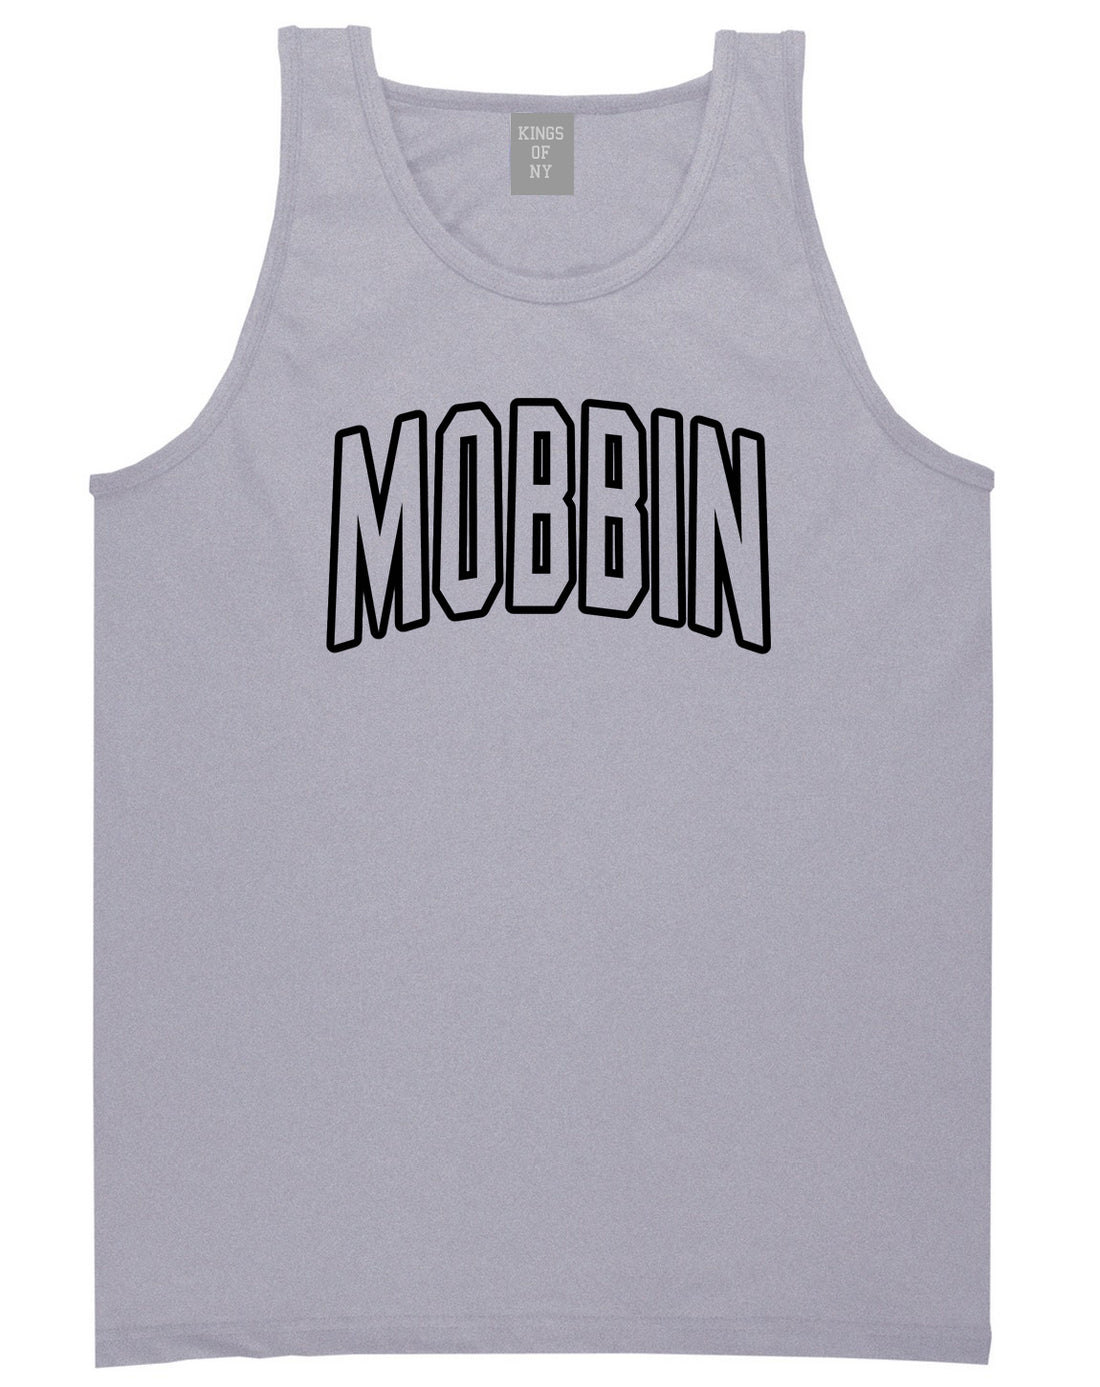 Mobbin Outline Squad Mens Tank Top Shirt Grey by Kings Of NY